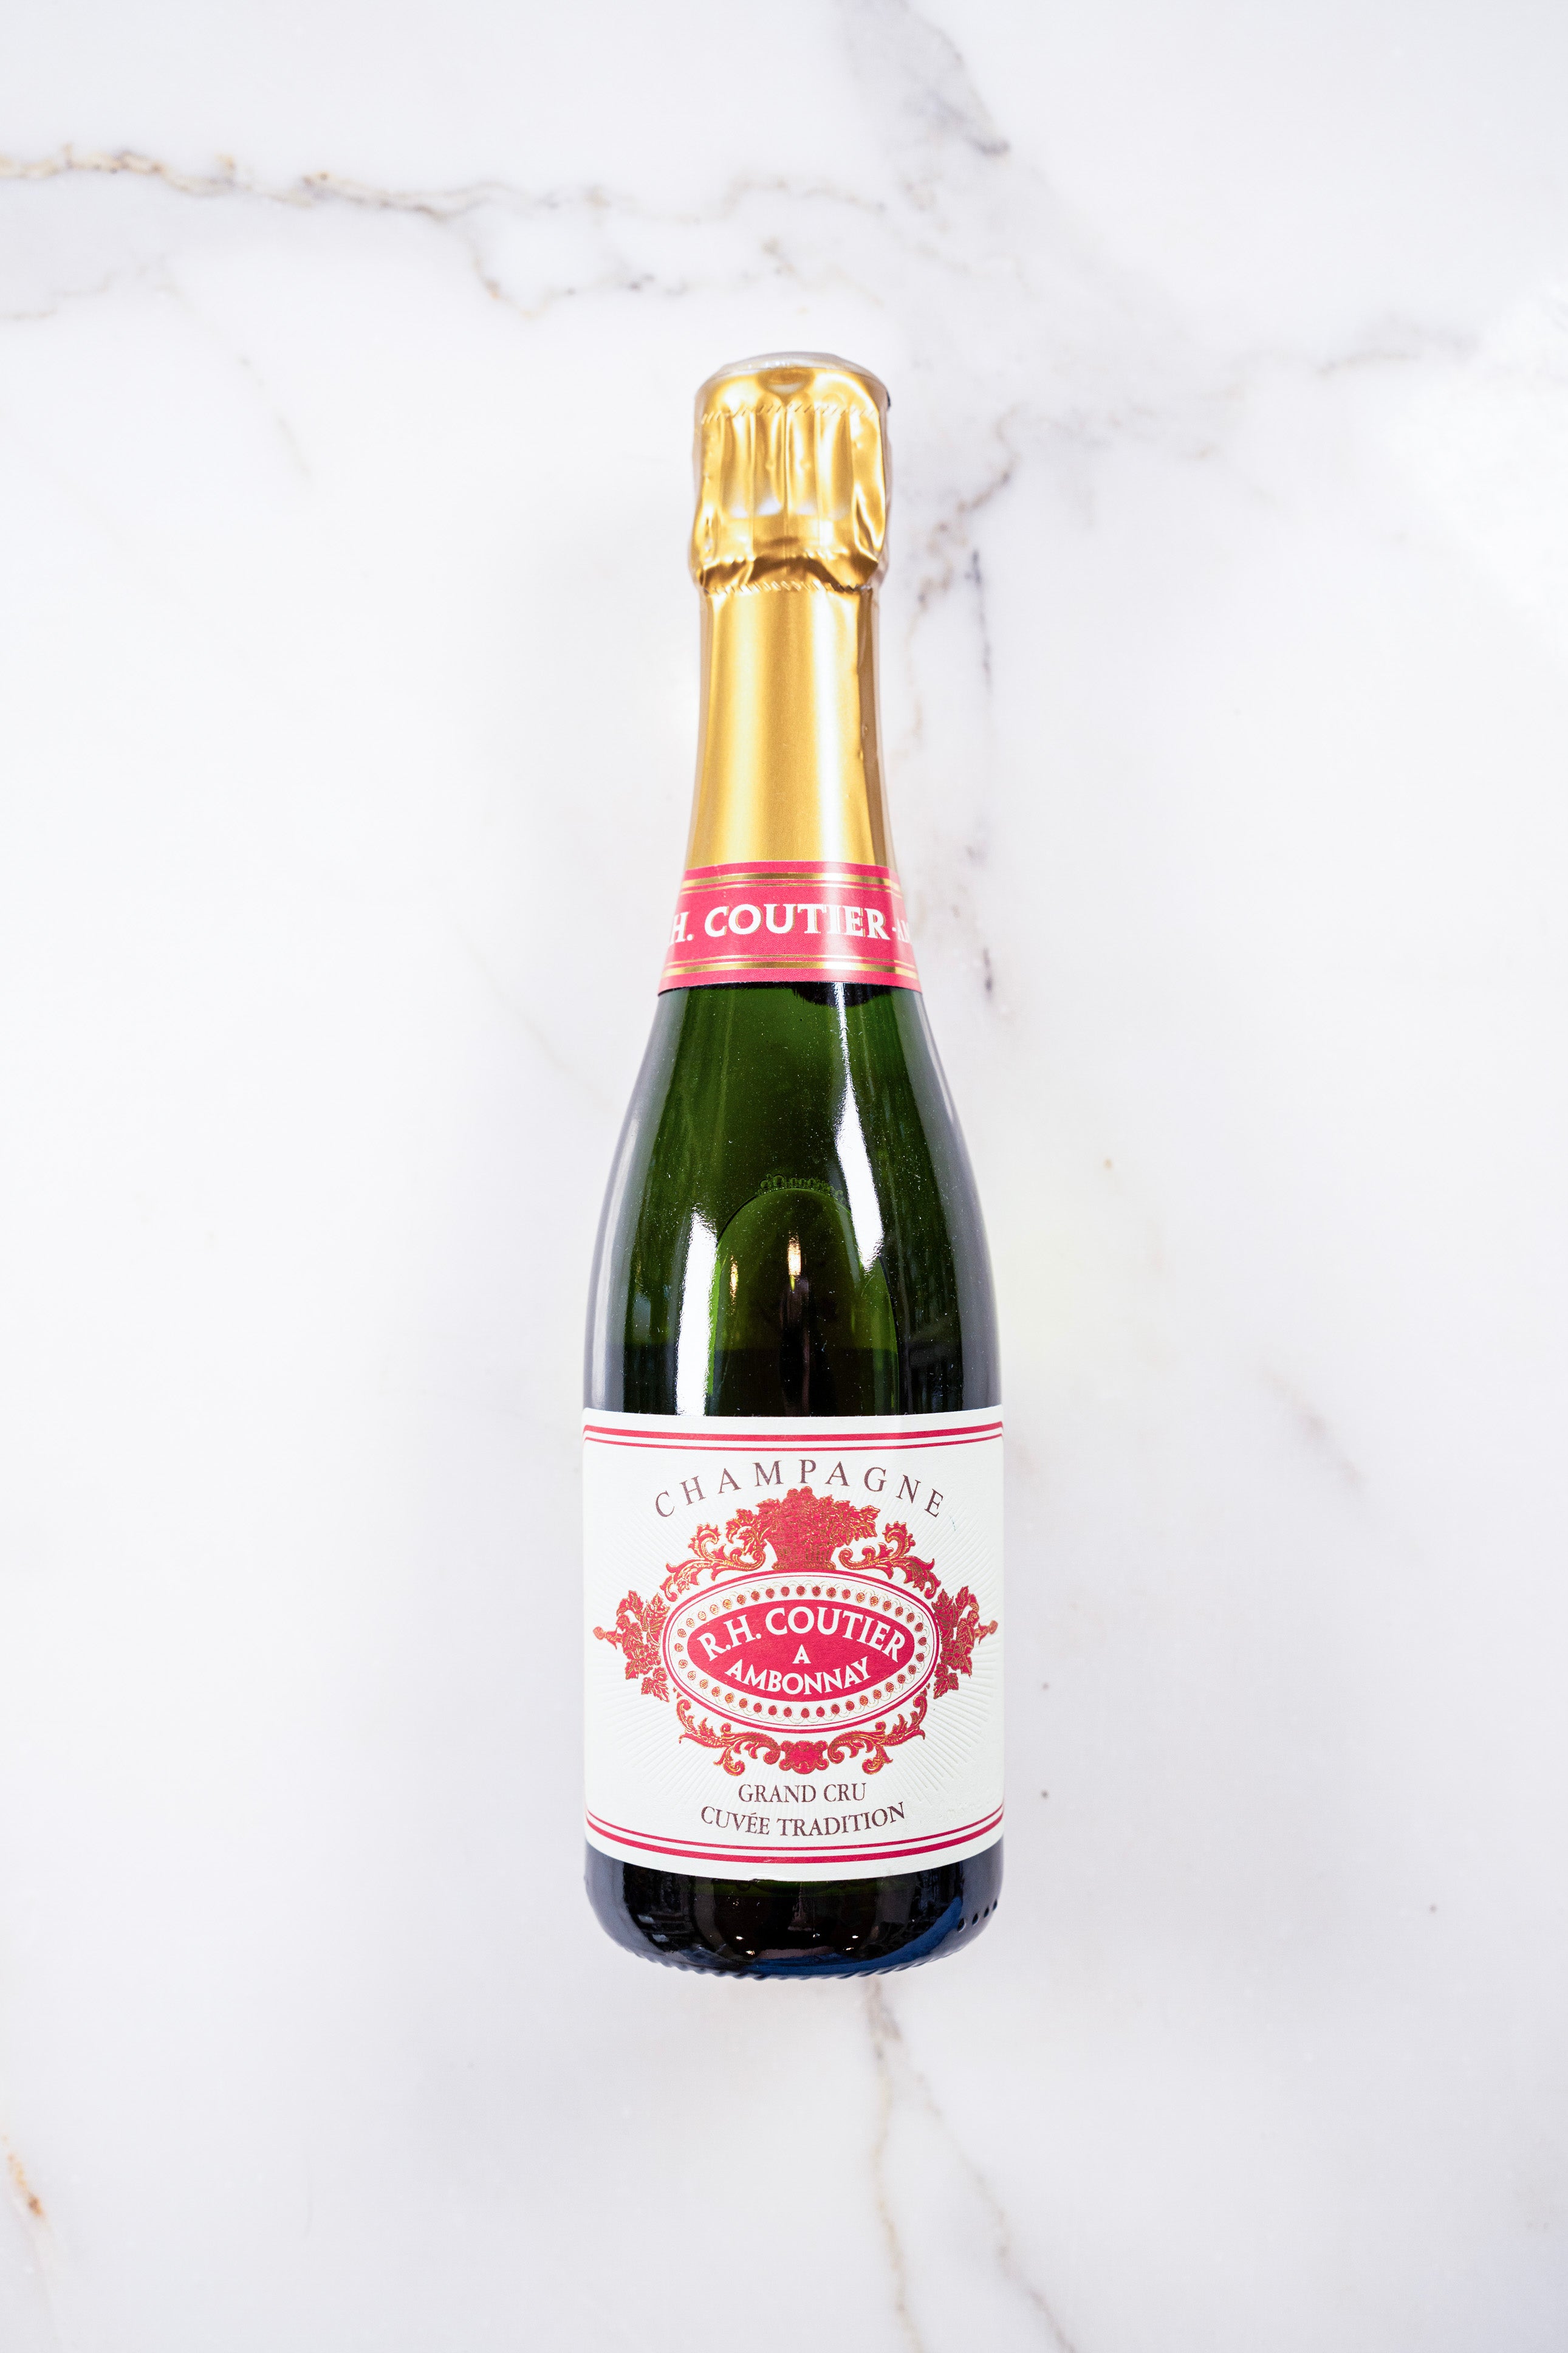 R.H. Coutier, Champagne Grand Cru Brut Cuvee Tradition (375ml)